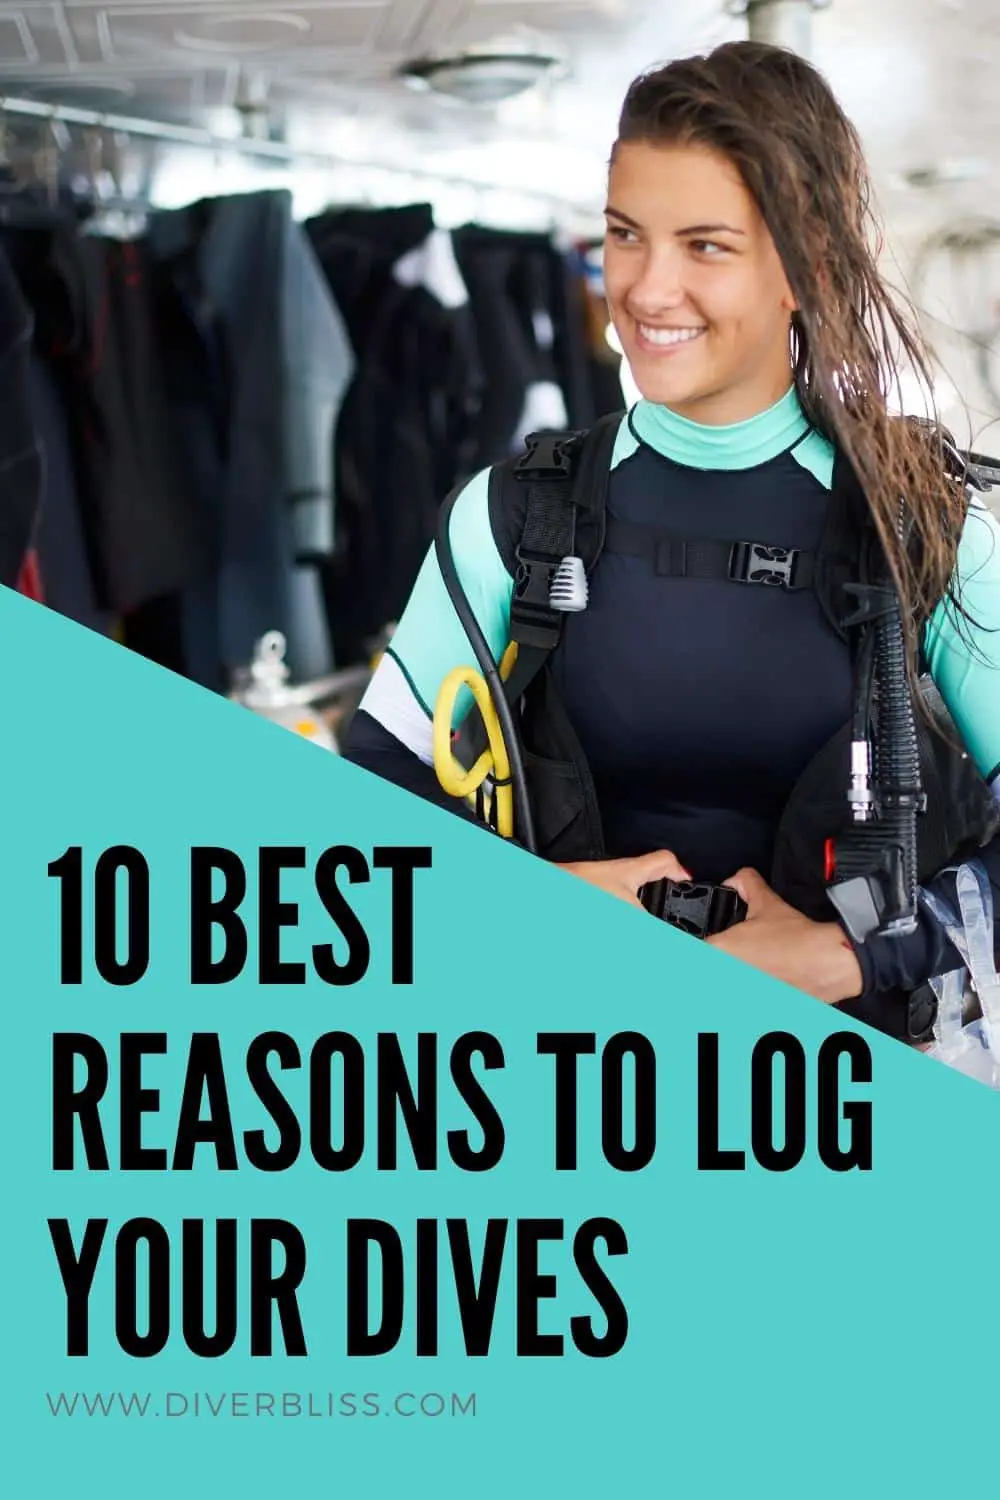 10 best reasons to log you dives